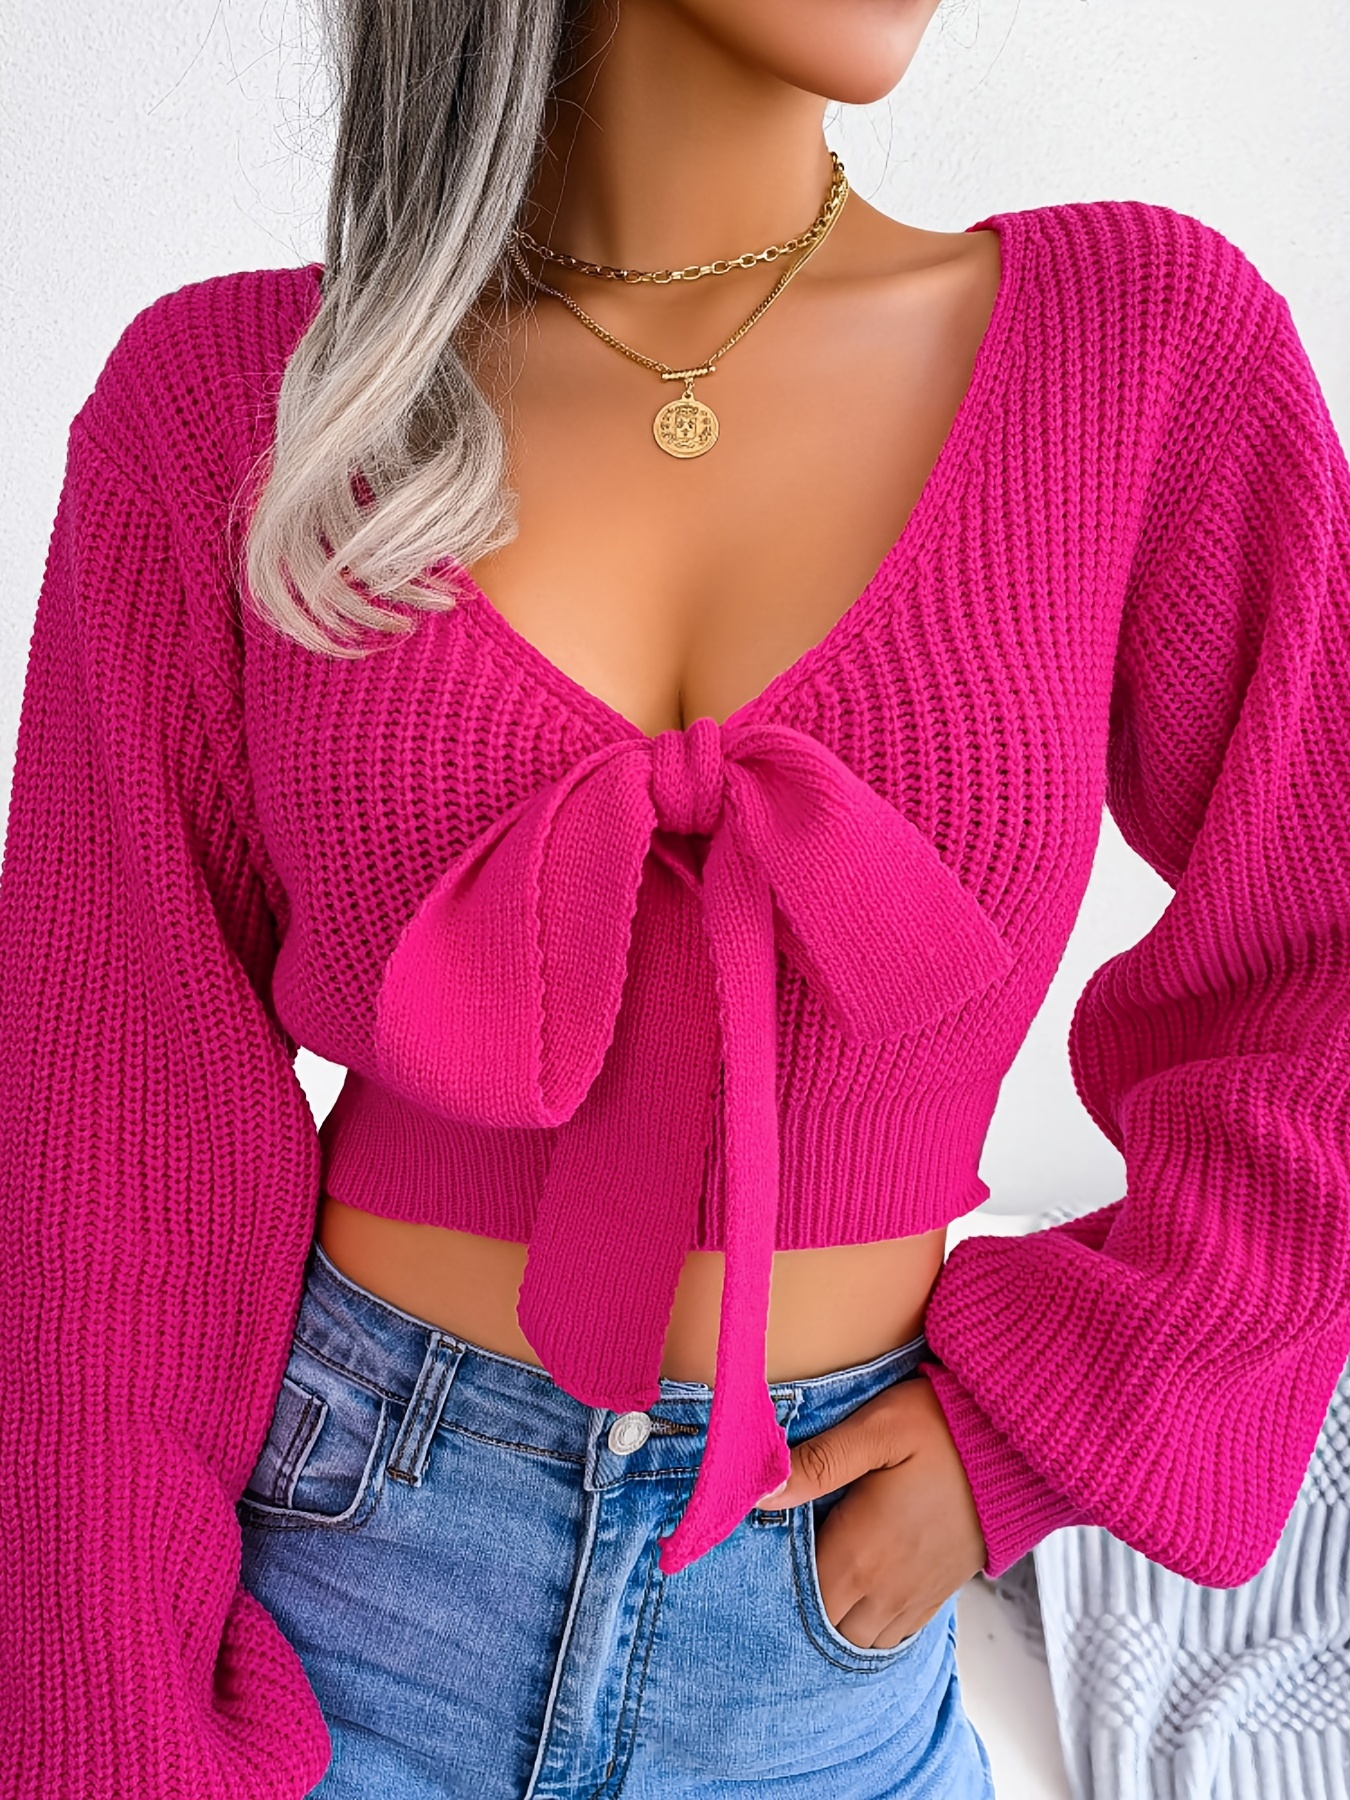 REORIAFEE Outfits for Women Summer Festival Outfits Women's Autumn Winter  Round Neck Sexy Cropped Sweater Skirt Knit Set Pink L 